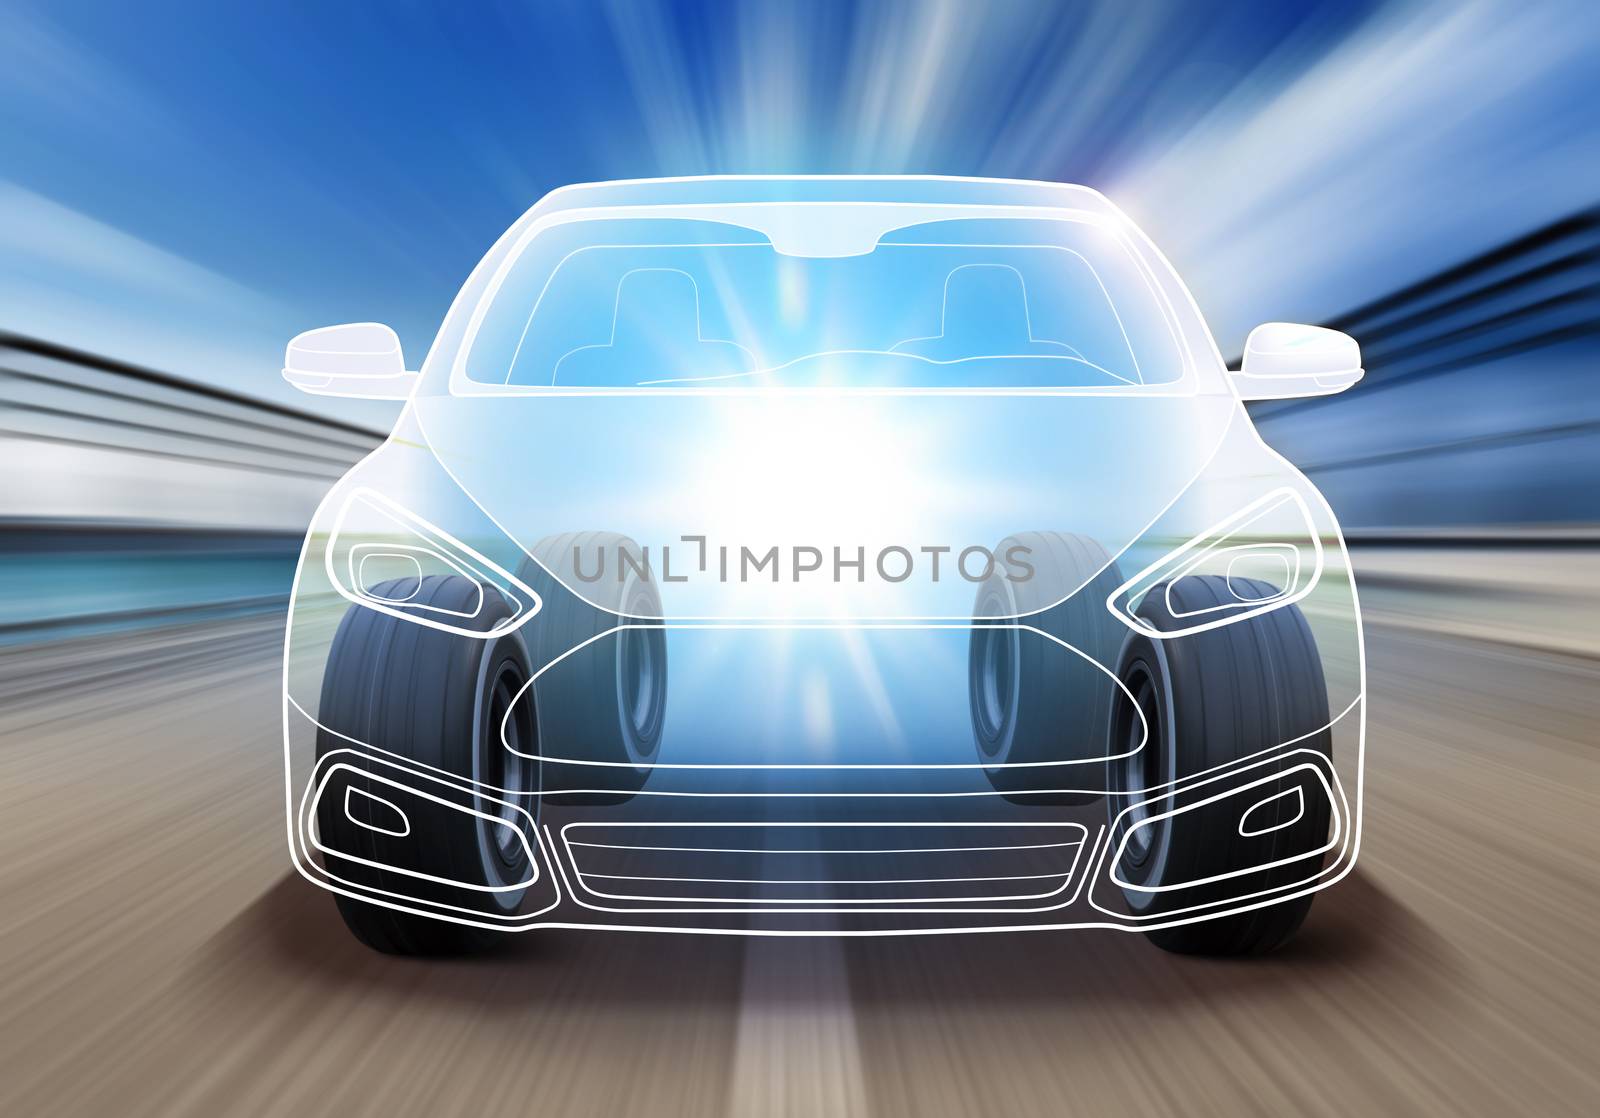 design of advanced car by ssuaphoto